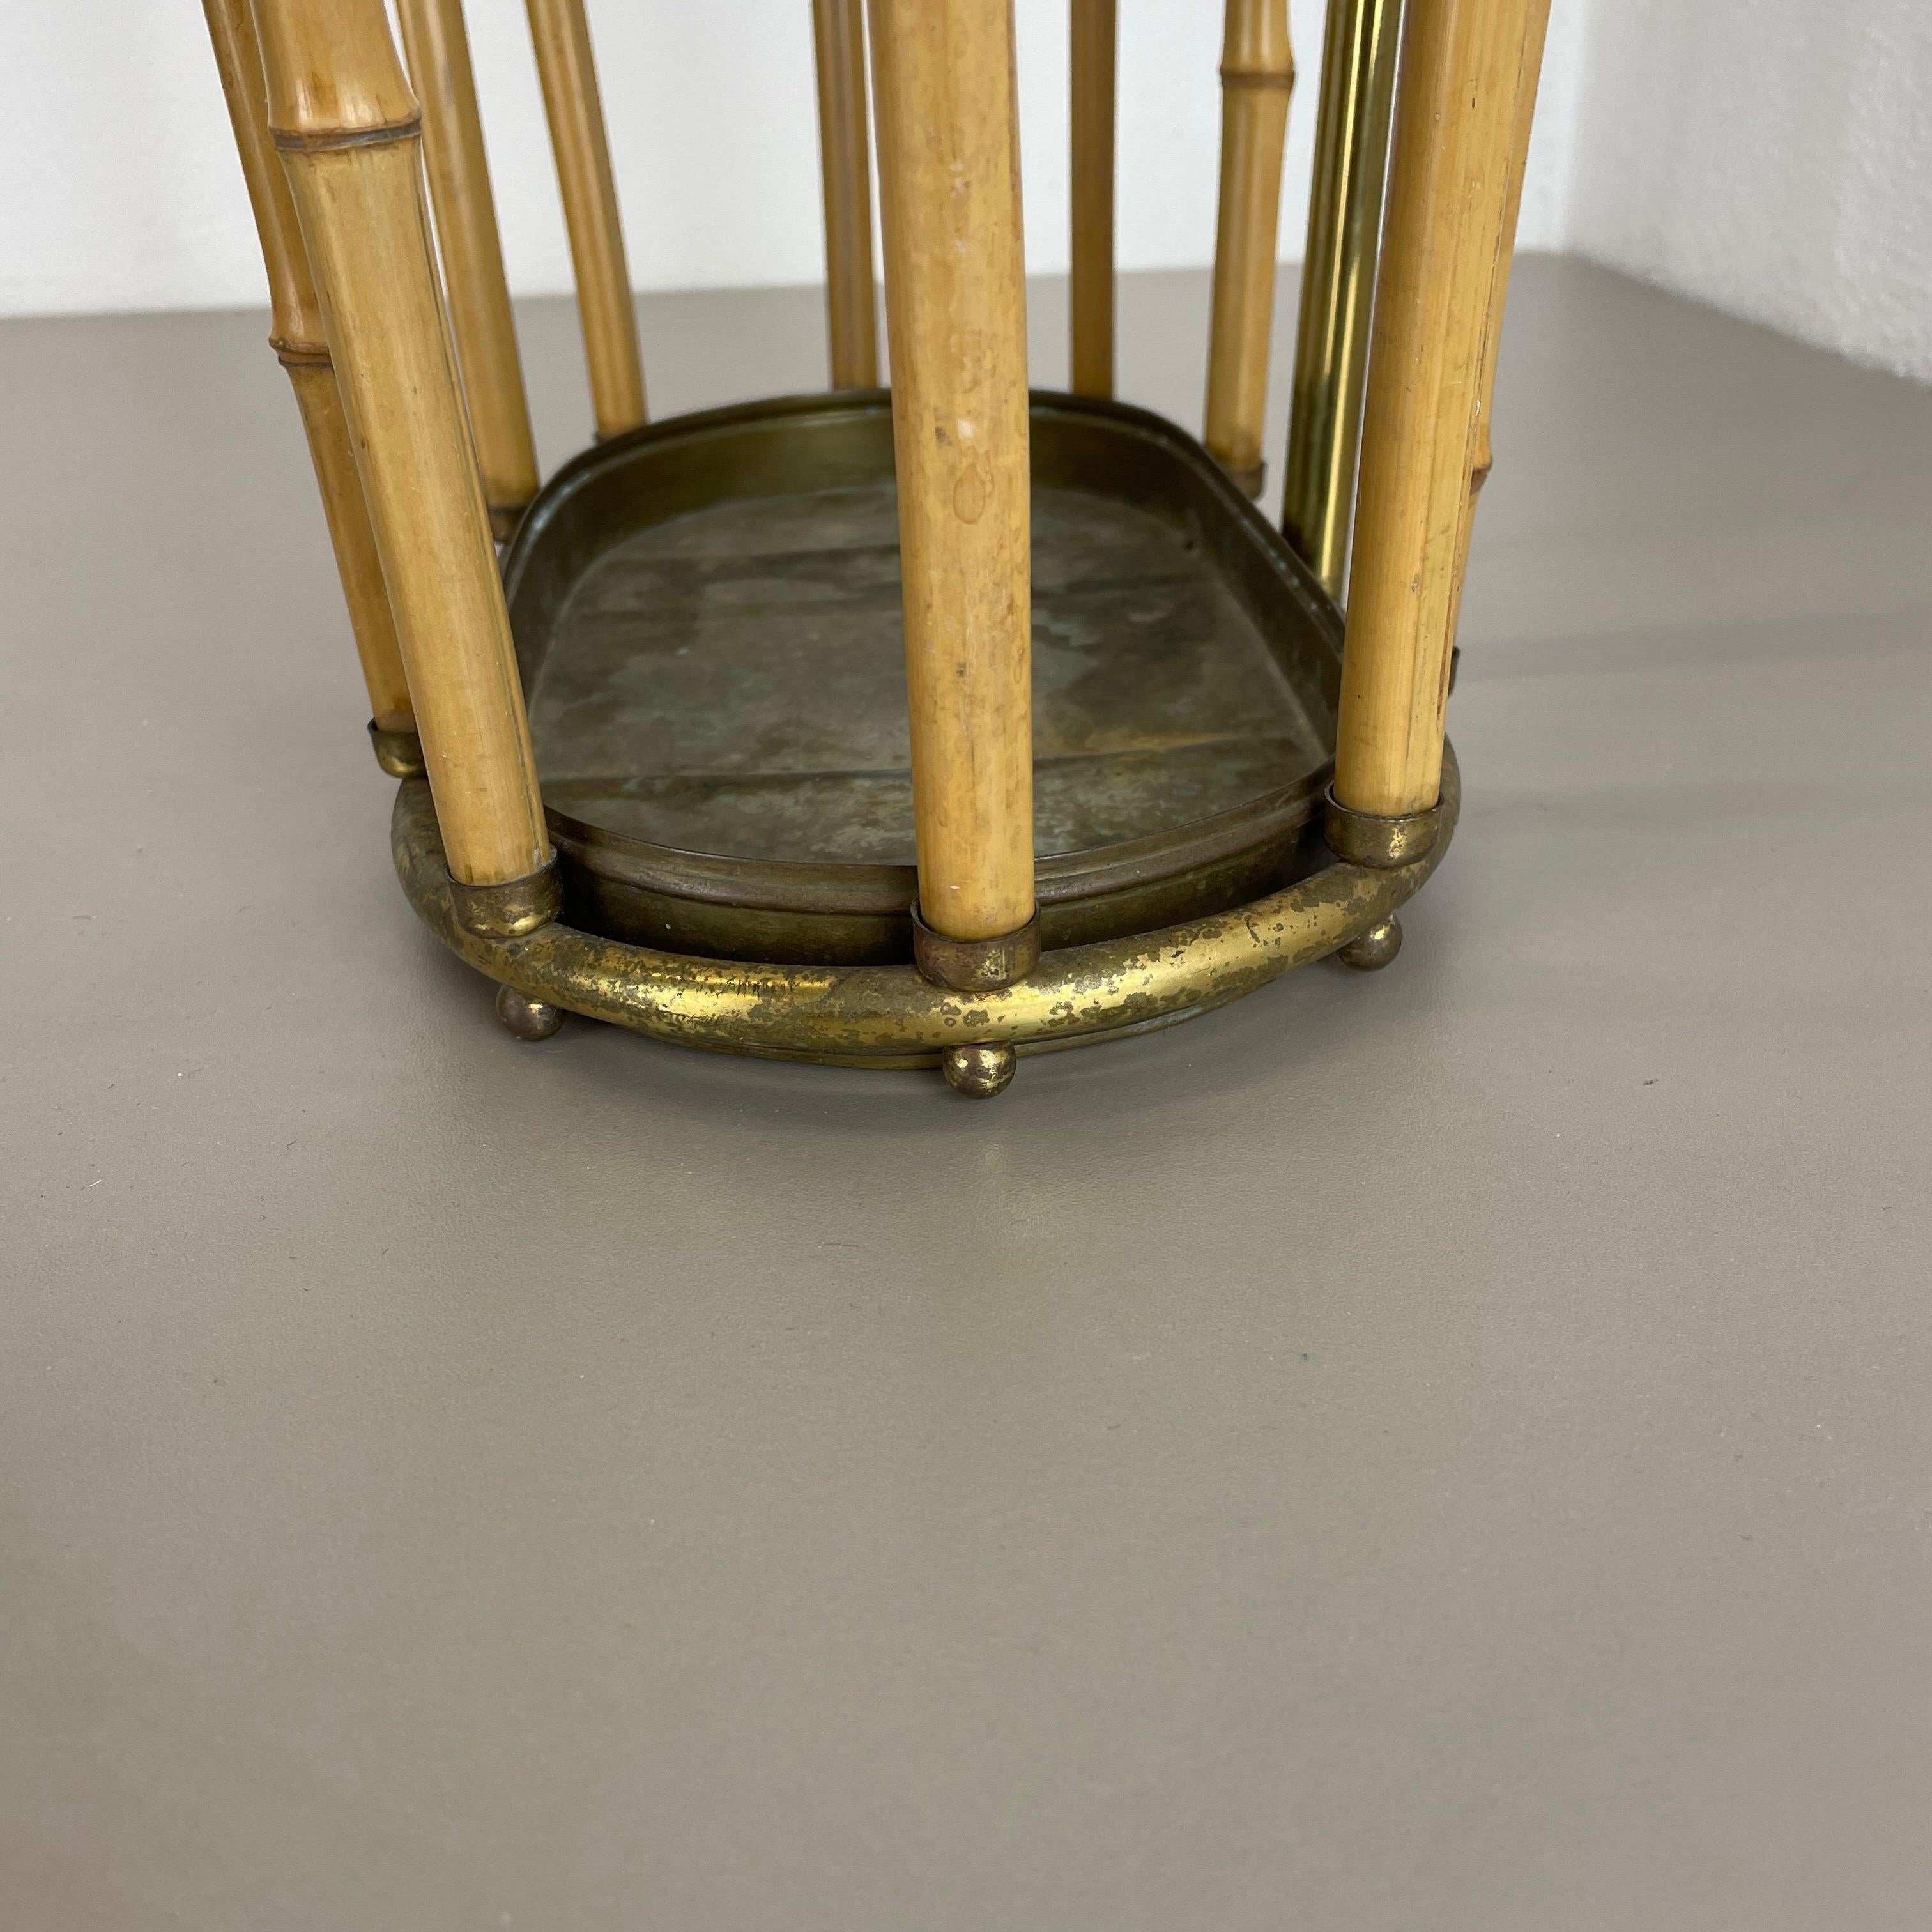 Hollywood Regency Auböck Style Brass Bamboo Umbrella Stand, Austria, 1950s For Sale 6